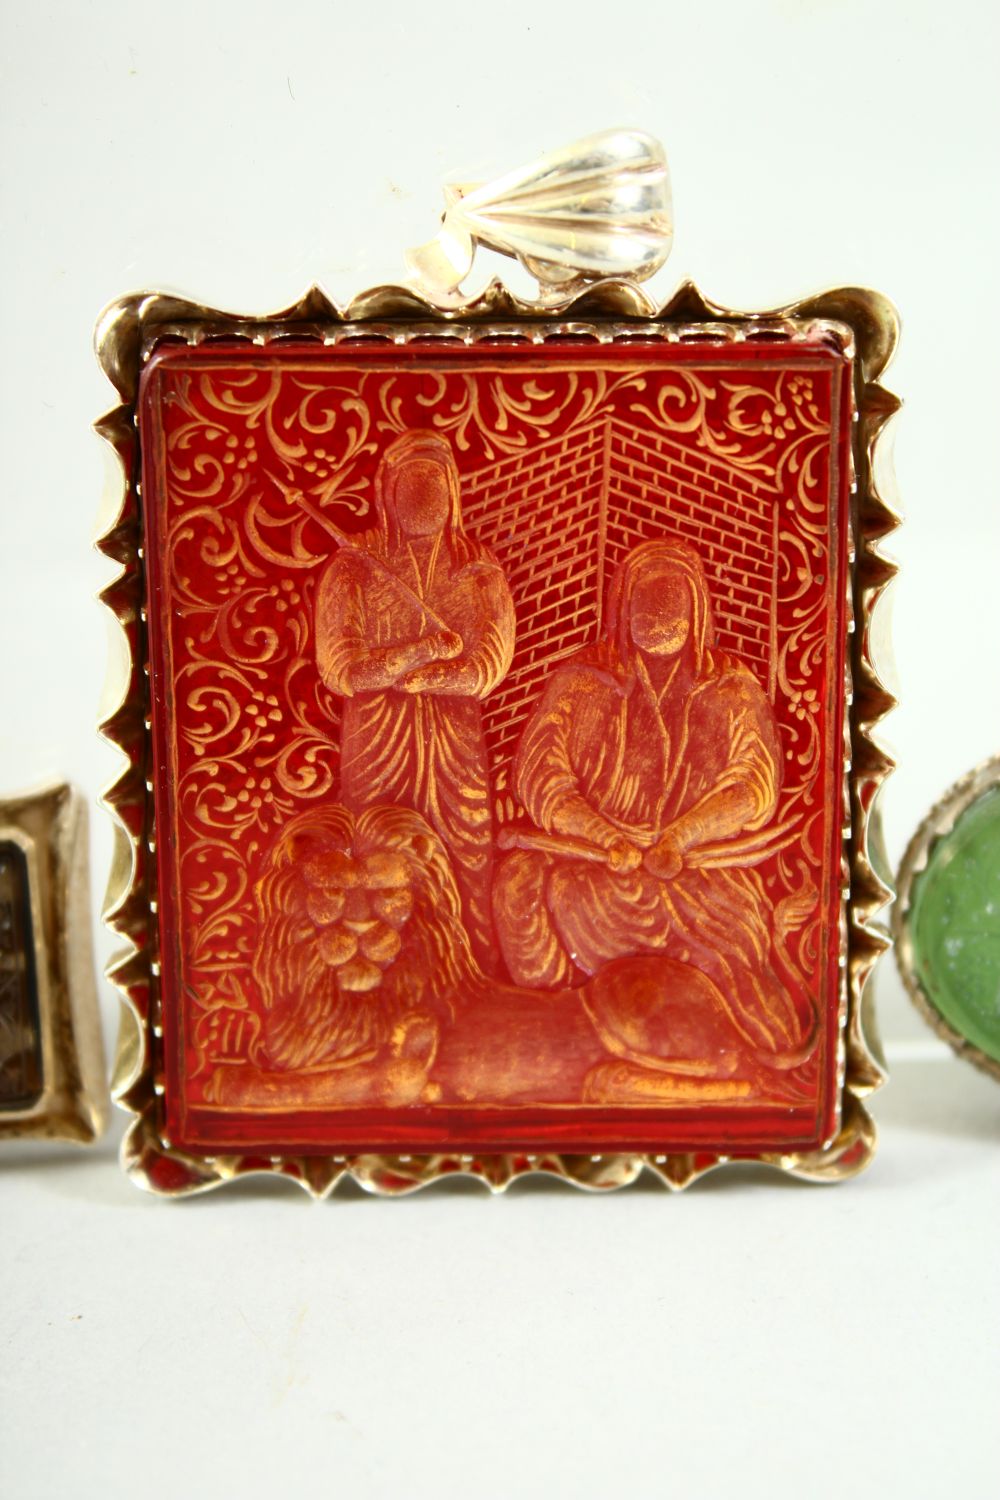 SIX ISLAMIC ENGRAVED WHITE METAL ENCASED SEALS, of various stones, together with a turquoise stone - Image 3 of 8